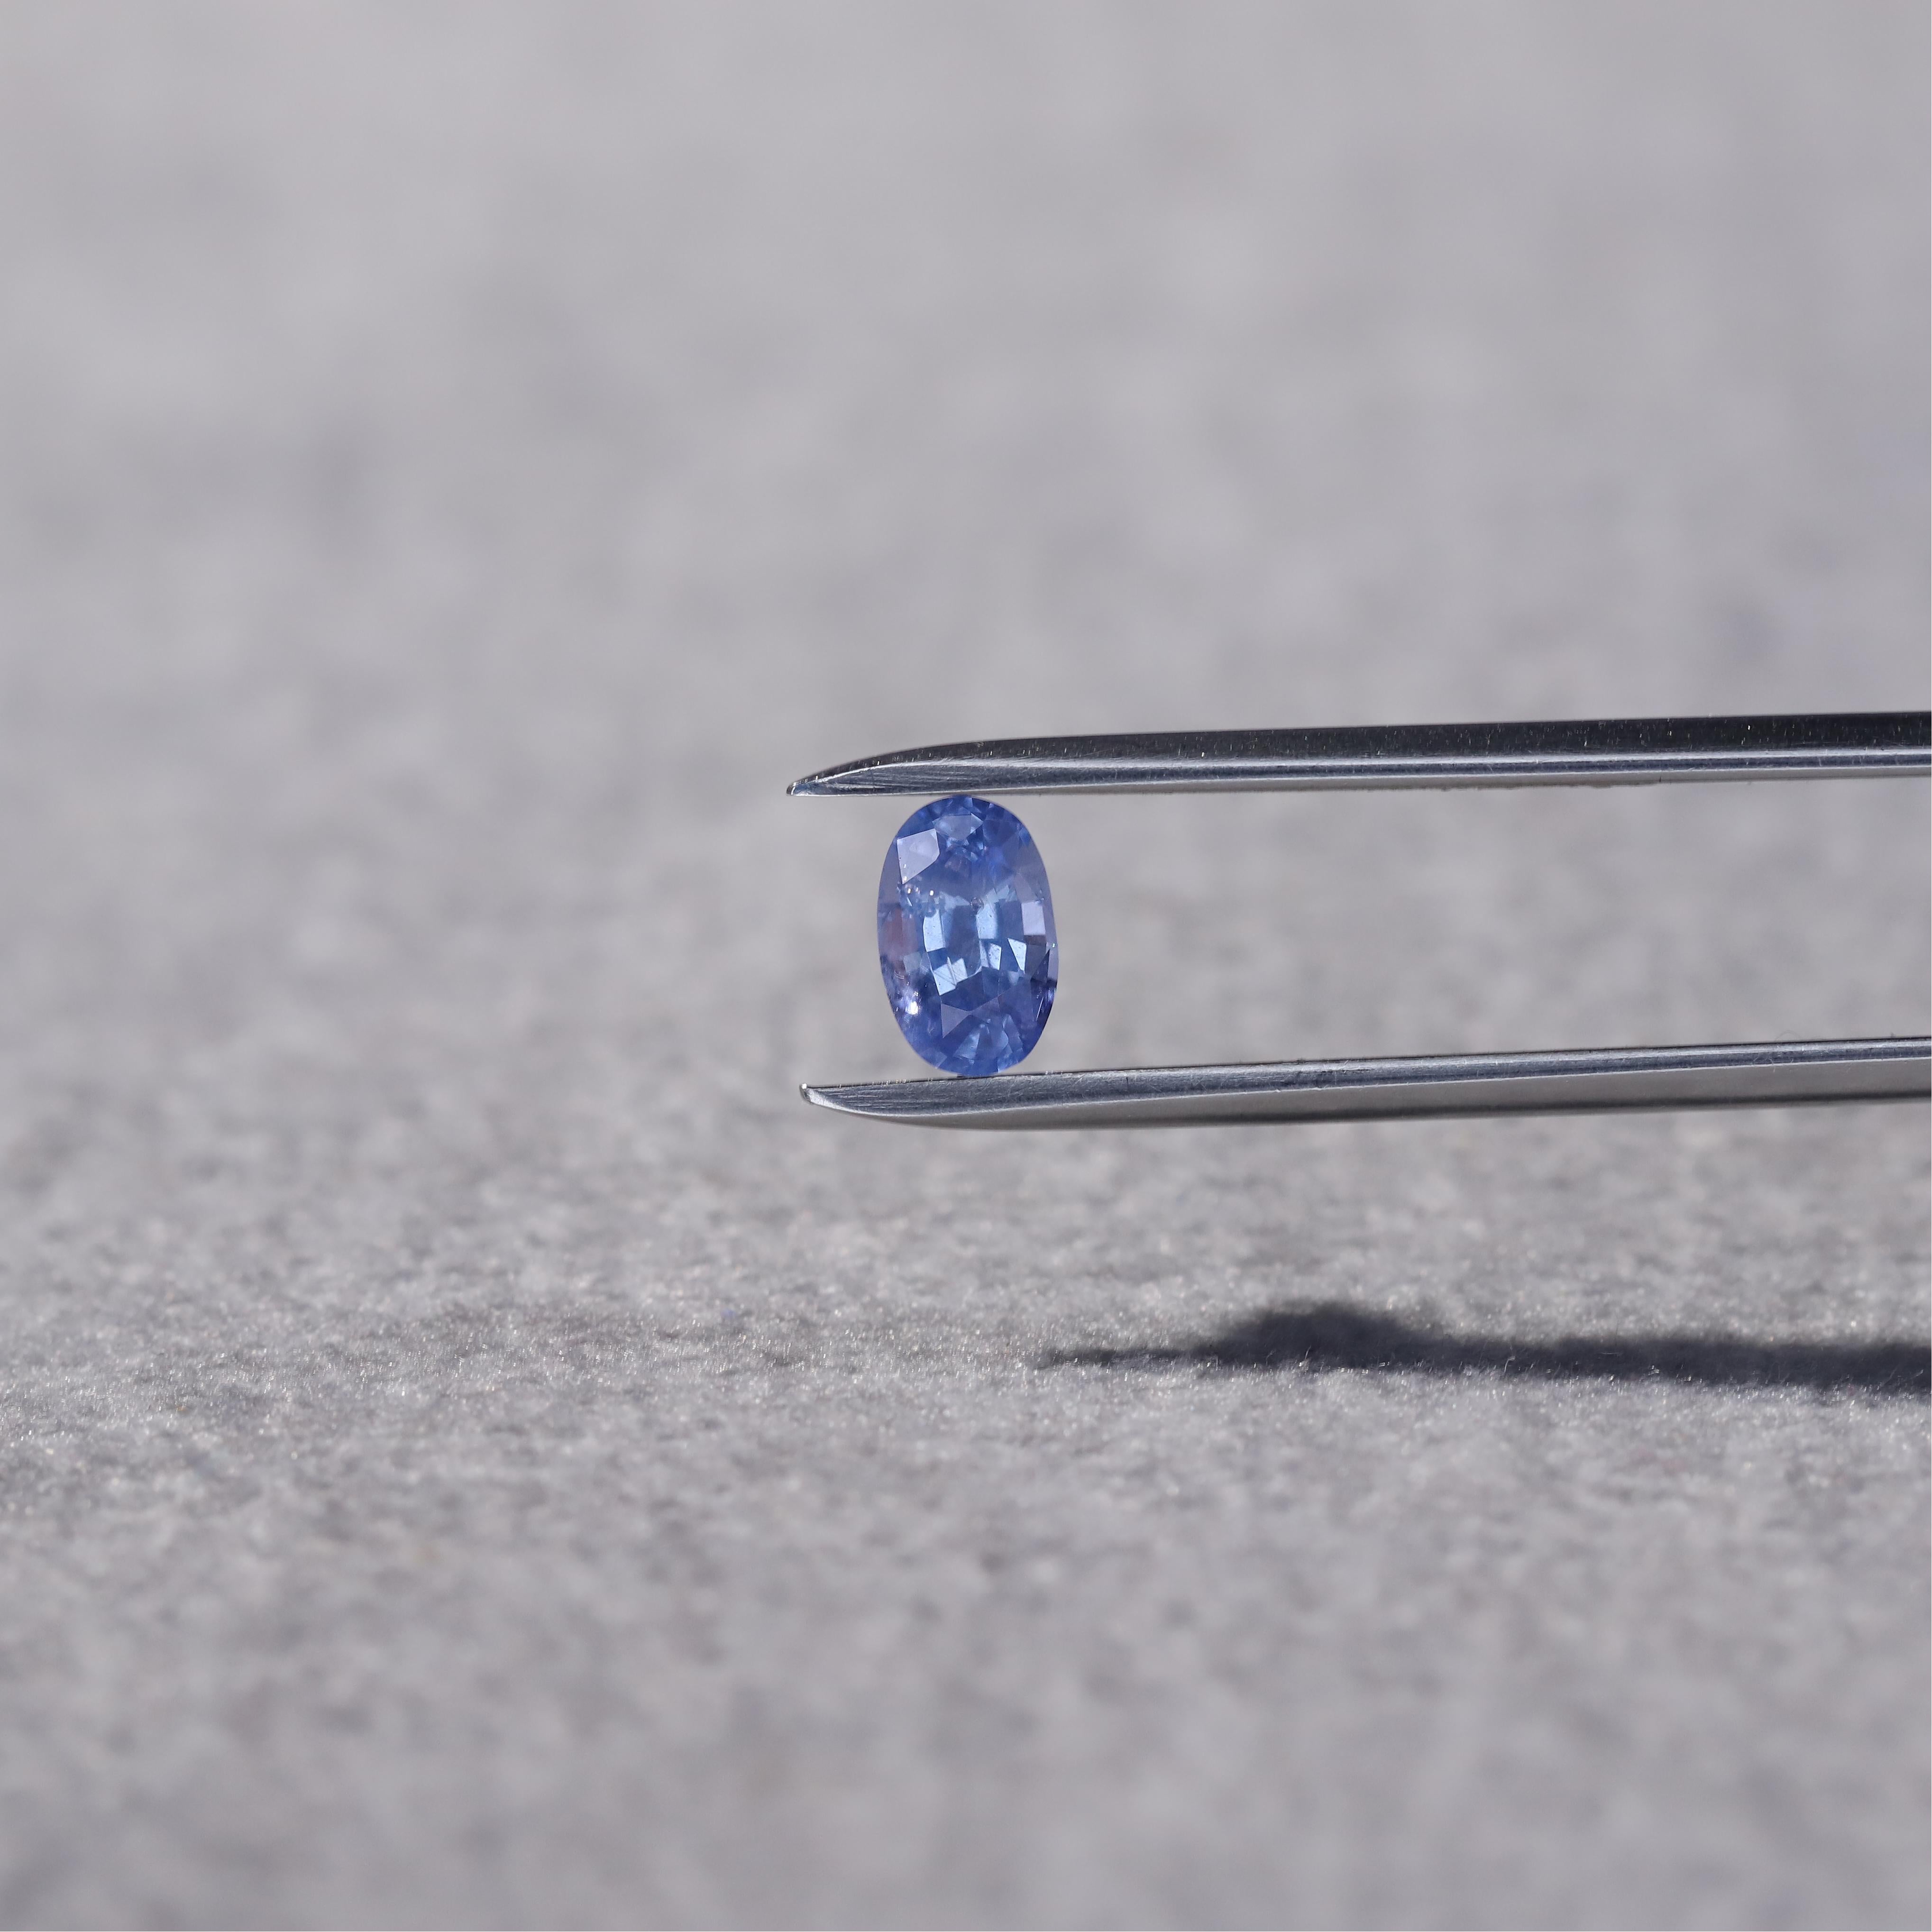 A petite oval-shaped natural unheated sapphire in sky blue with a dash of baby blue hues. 

Natural Unheated Blue Sapphire sourced from Ceylon 0.73 Carat.

This magnificent blue sapphire by KNS Gems is available for purchase as a loose gemstone. The